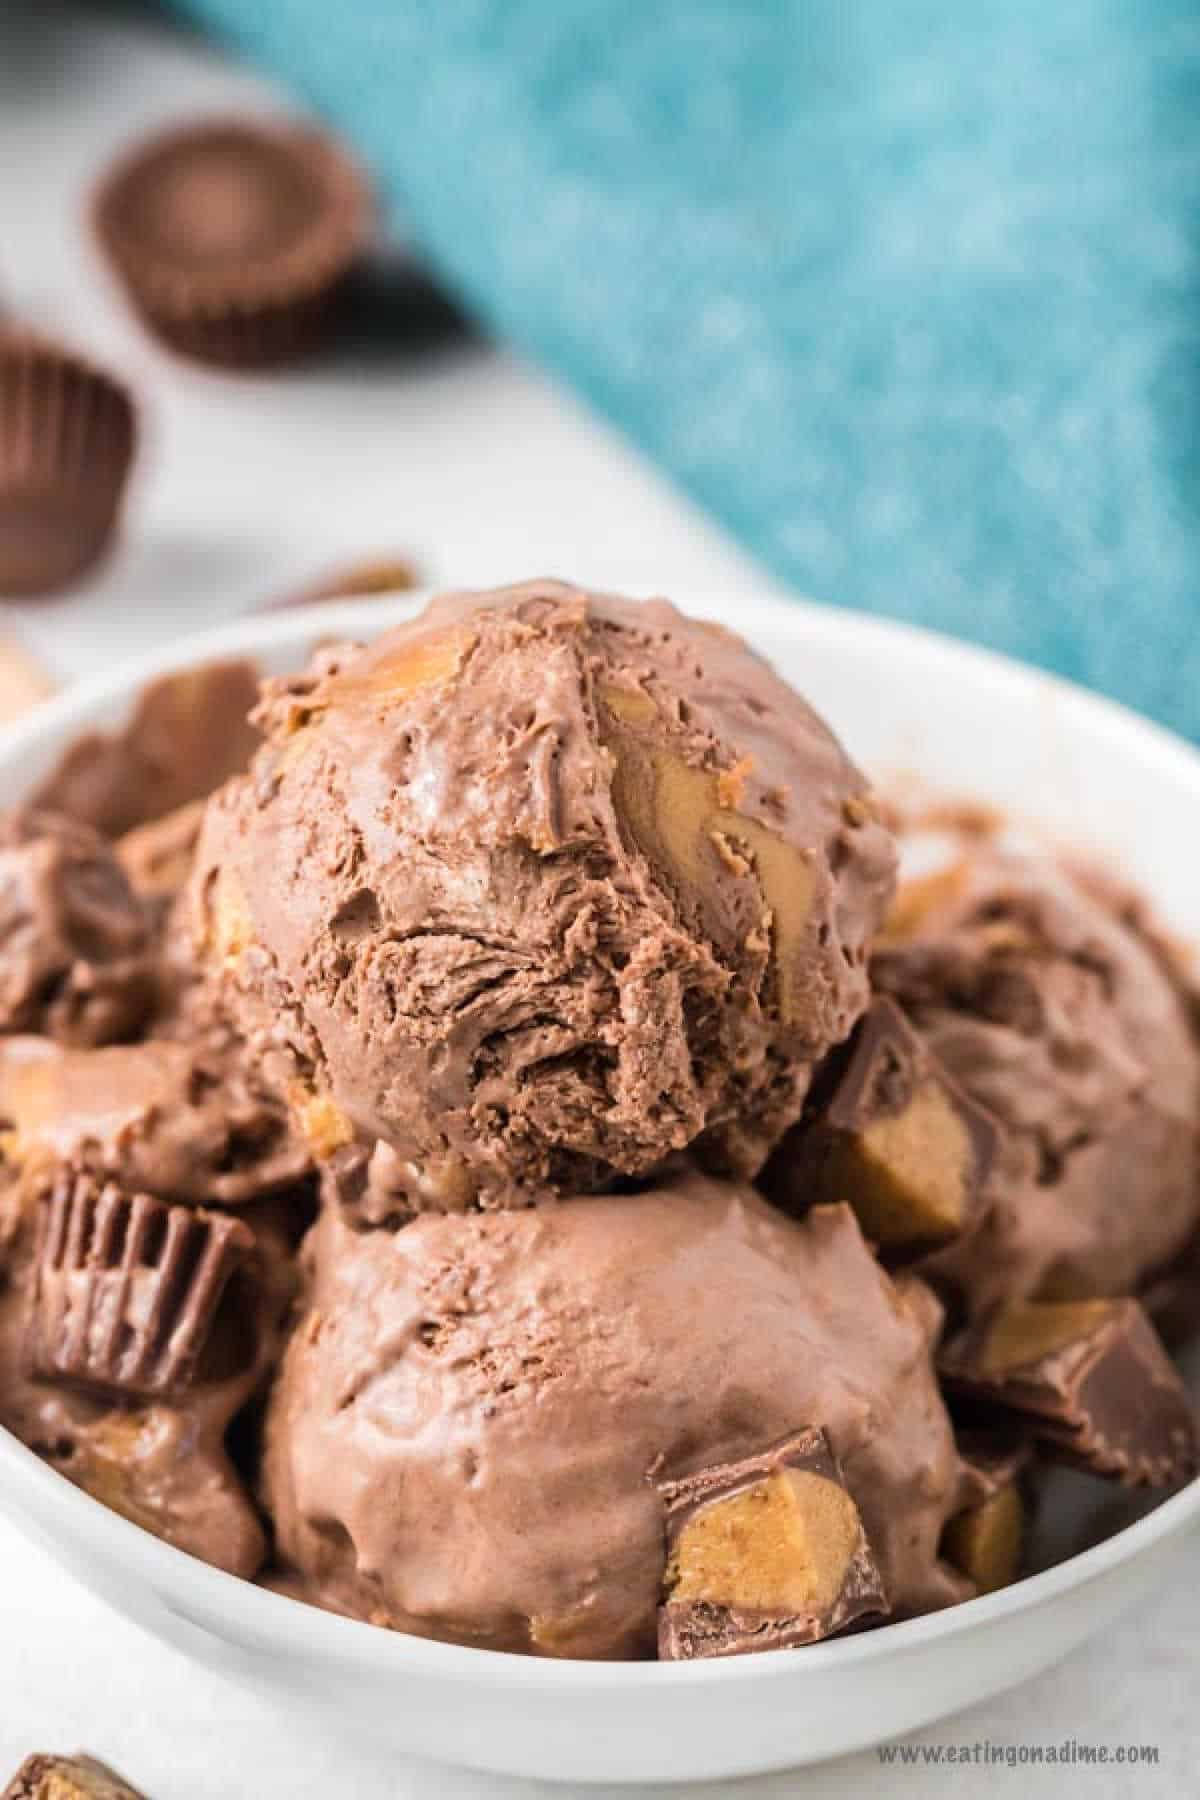 Chocolate peanut butter ice cream scoops in a white bowl